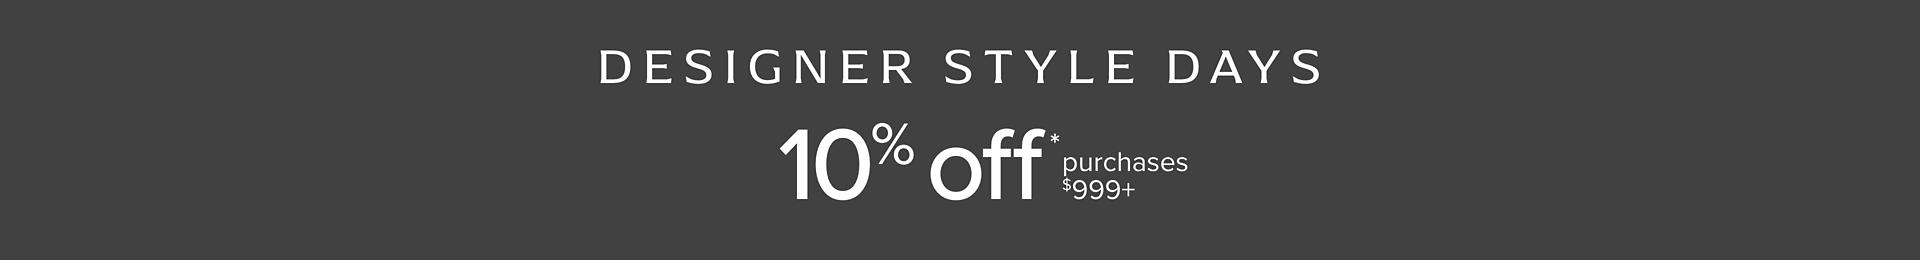 Designer Style Days Sale 10% Off $999 or more or Choose Special Financing Options.